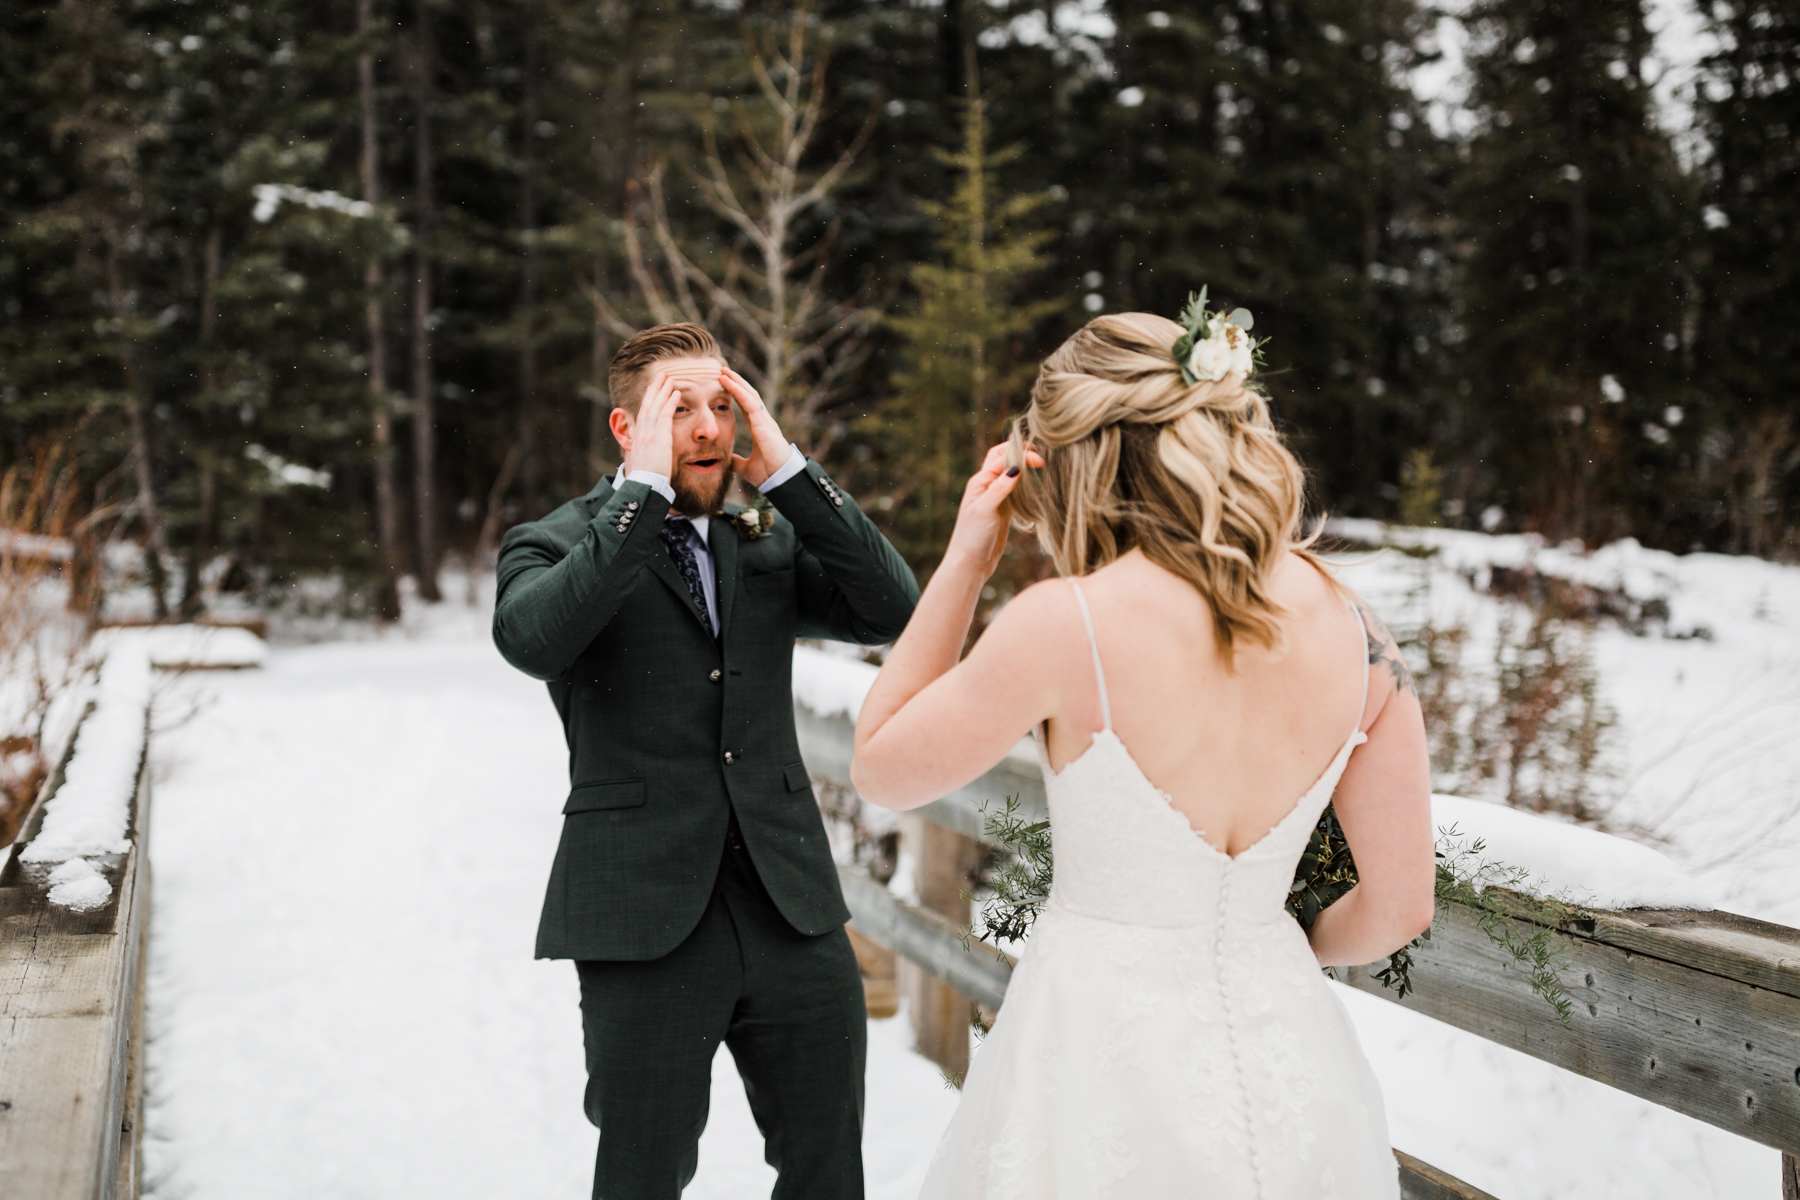 Canmore Elopement Photographer in the Canadian Rockies - Image 15